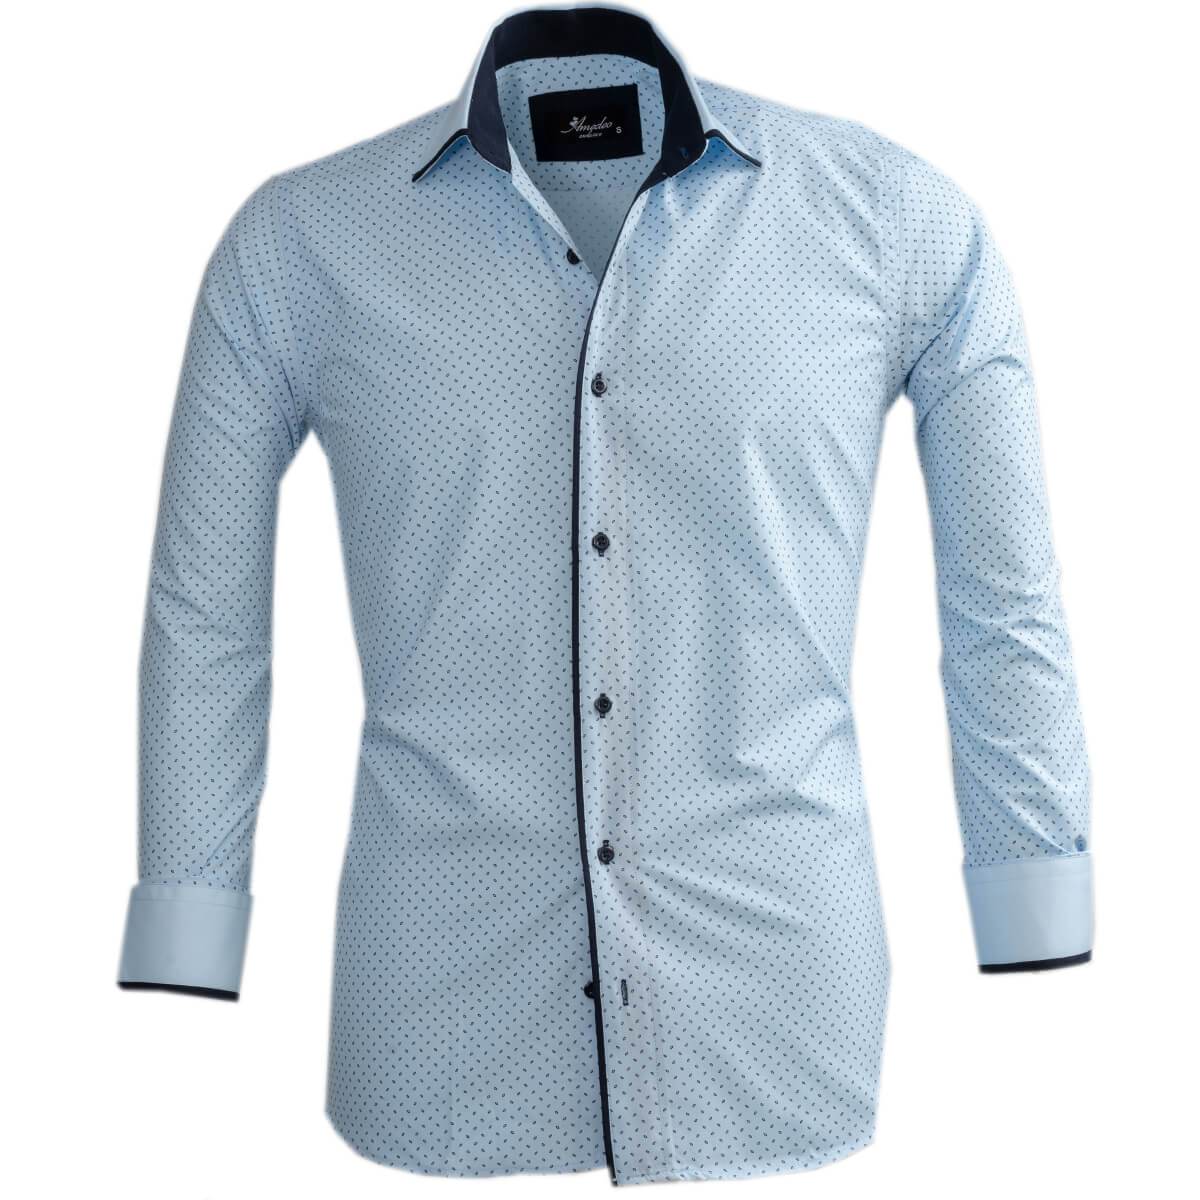 Light Blue Mens Slim Fit Designer Dress Shirt - tailored Cotton Shirts for Work and Casual Wear - Amedeo Exclusive